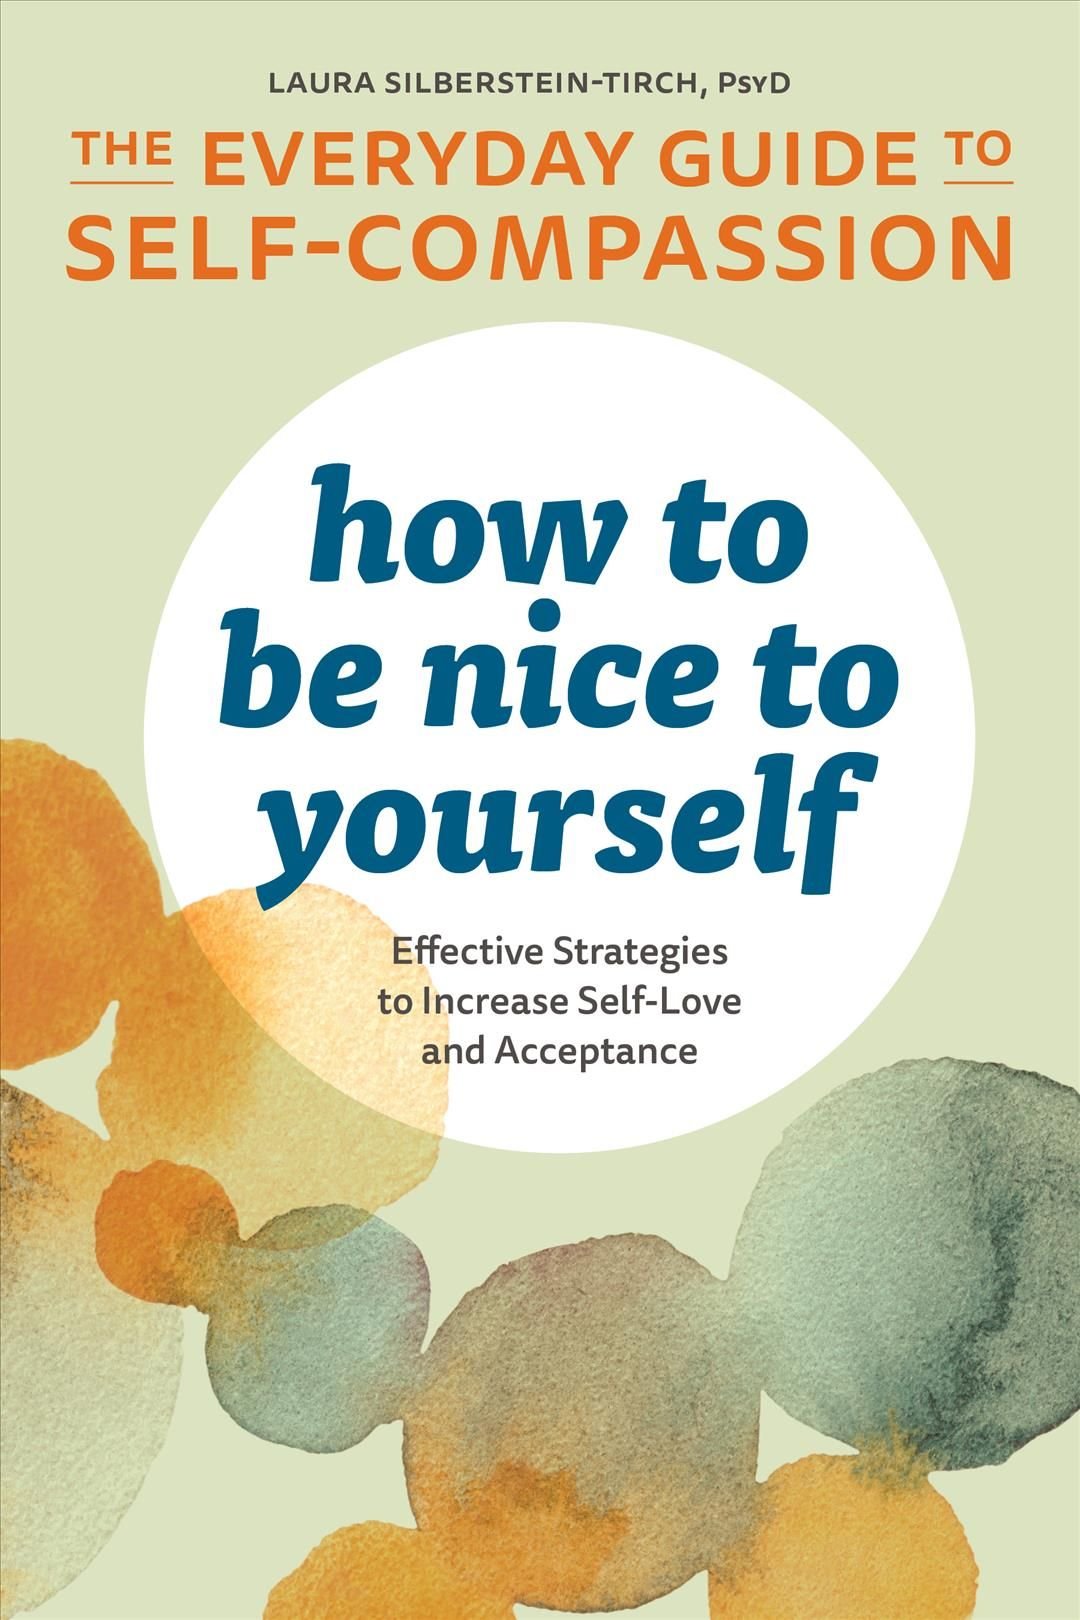 How to Be Nice to Yourself: The Everyday Guide to Self-Compassion